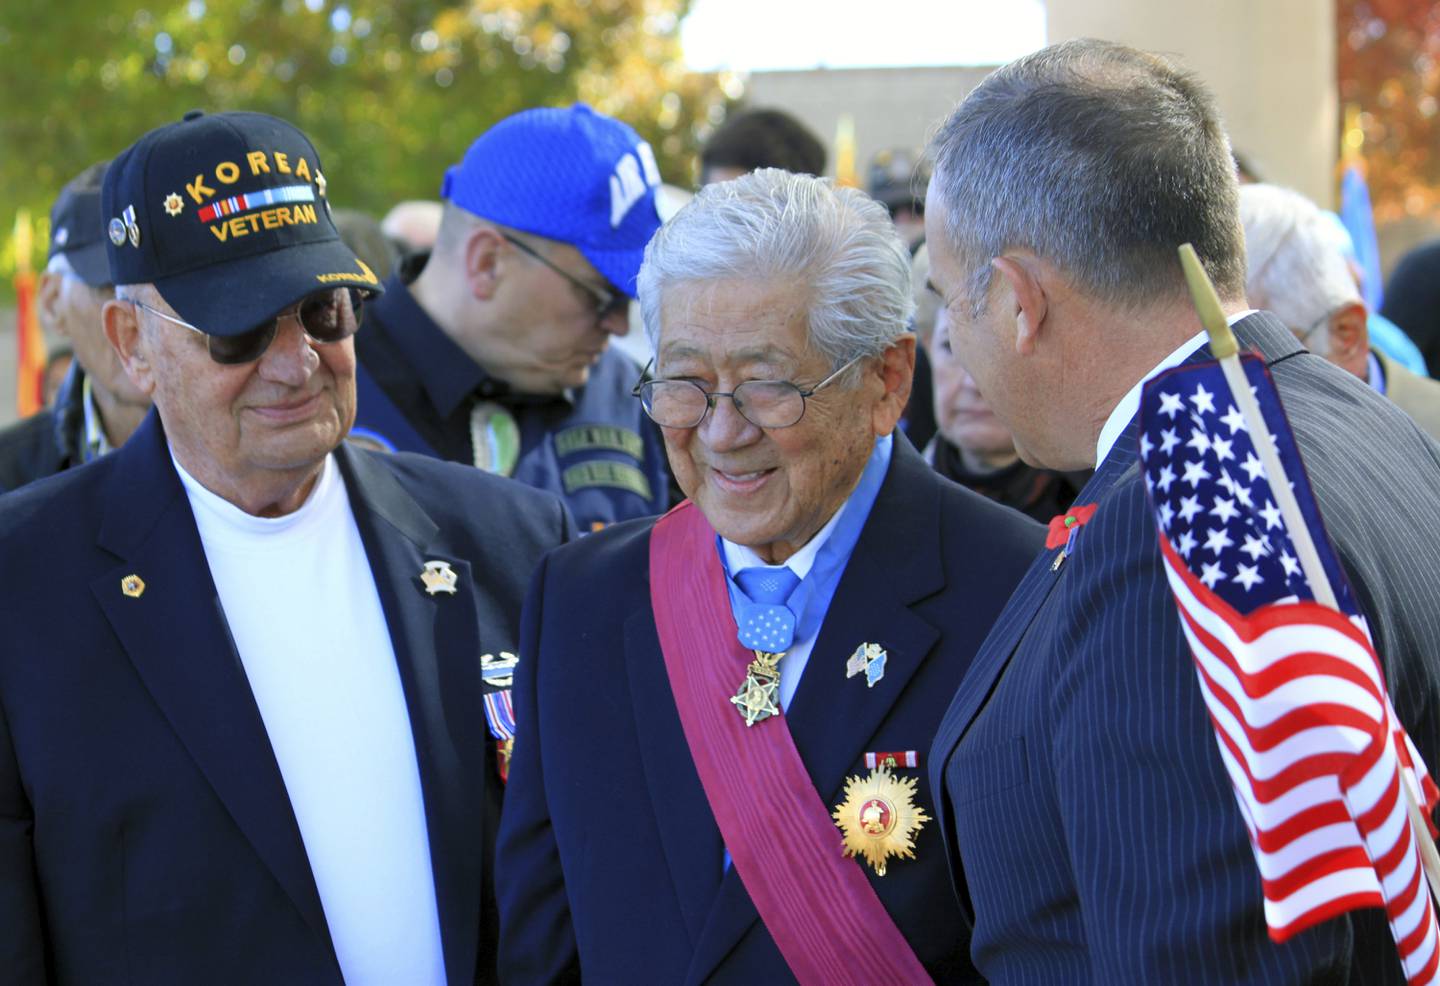 FILE - People stand to honor Medal of Honor recipient Hiroshi Miyamura, center, during a Veterans Day ceremony at the New Mexico Veterans Memorial in Albuquerque, N.M., on Nov. 11, 2014. (Susan Montoya Bryan/AP, File)